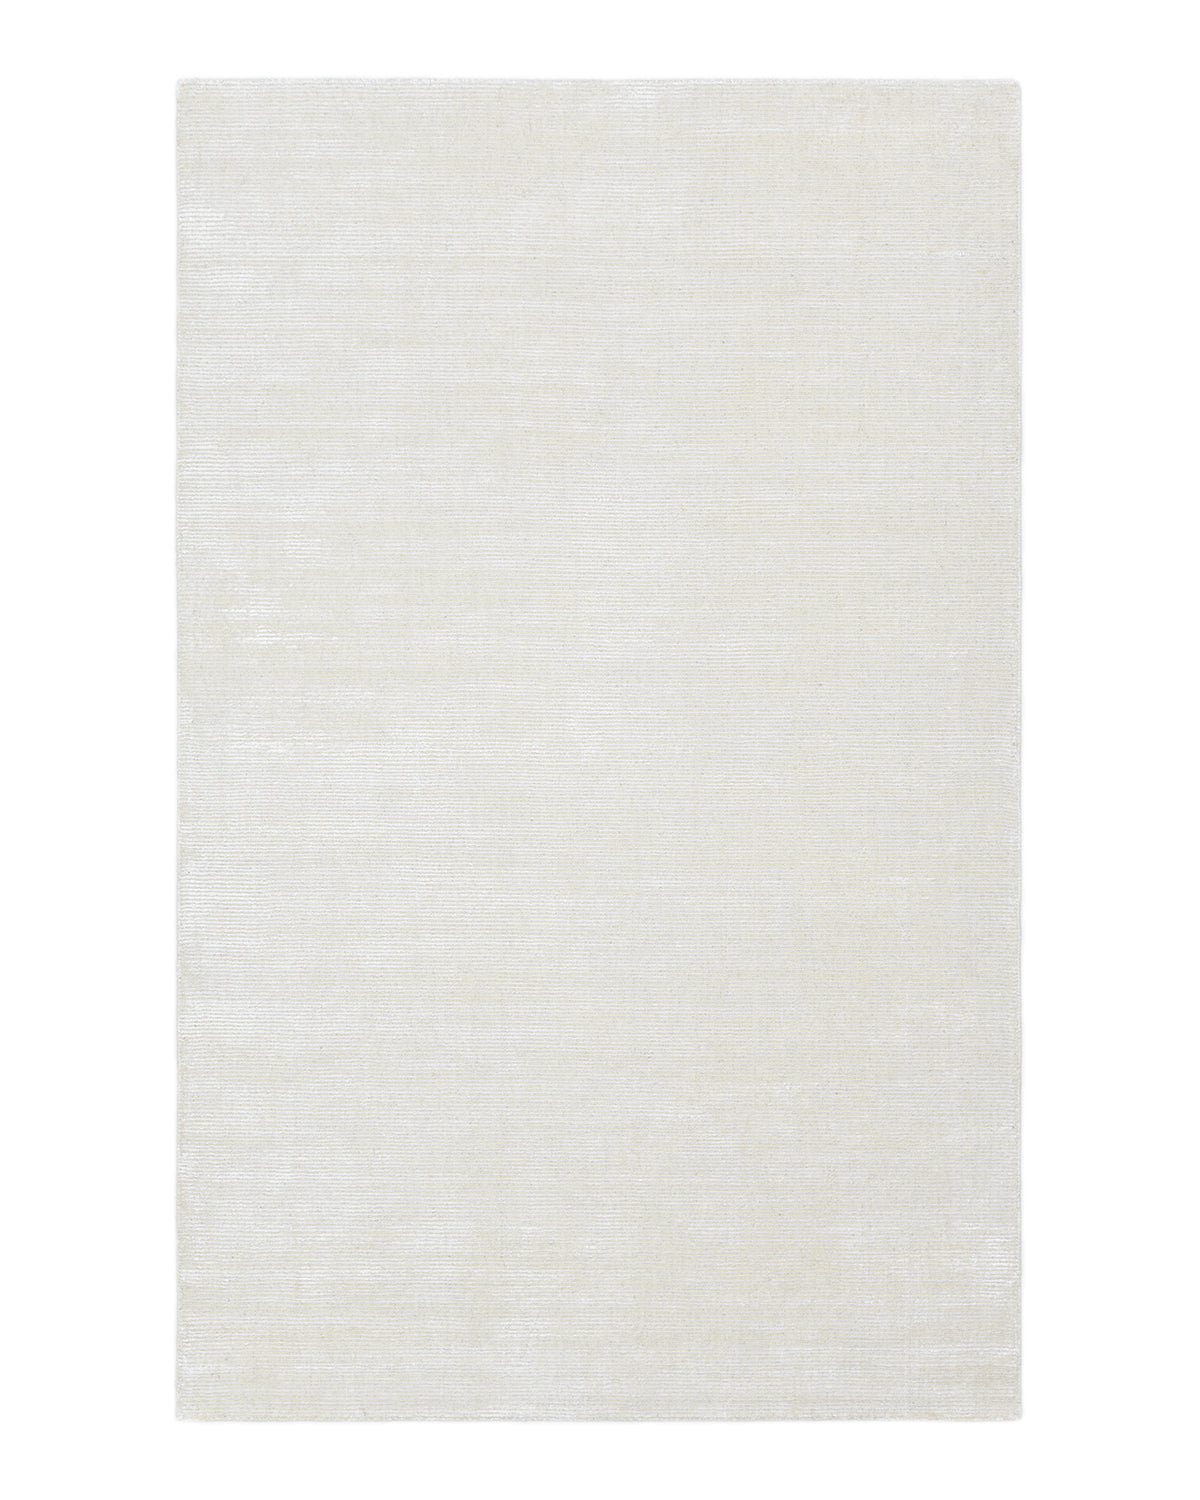 Cordi Hand Loomed Contemporary Solid Area Rug